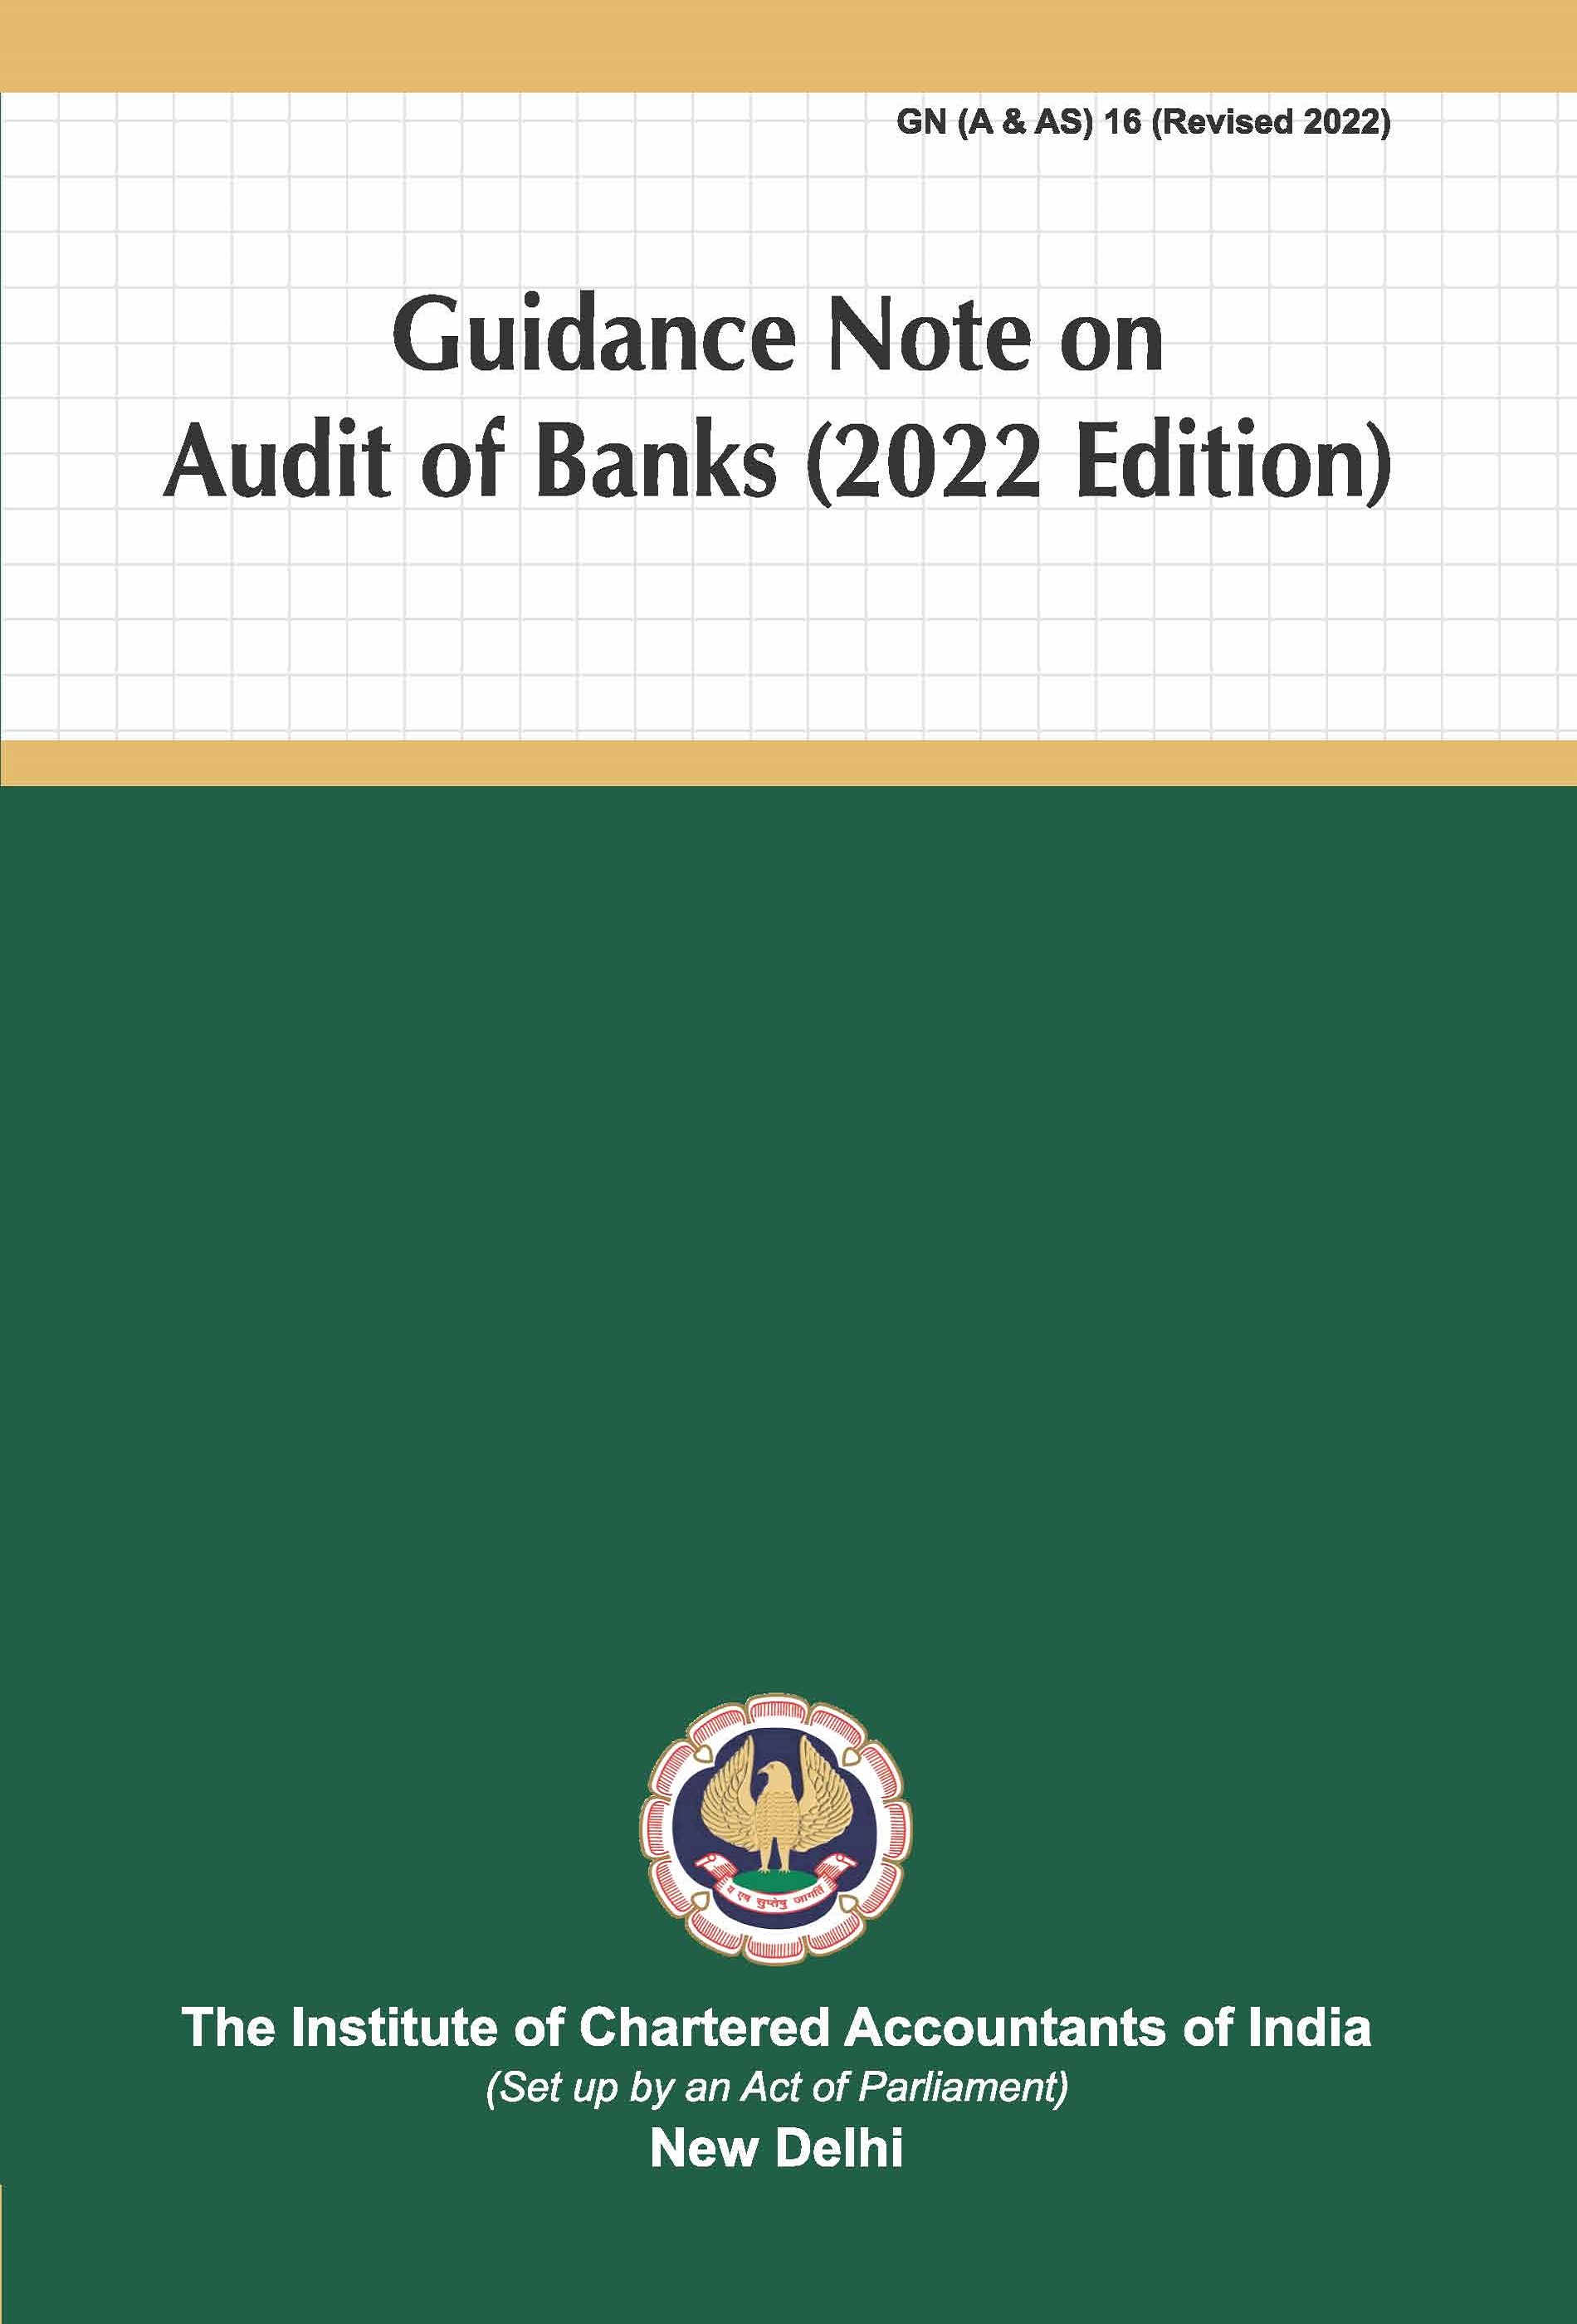 Guidance Note on Audit of Banks (2022 Edition)